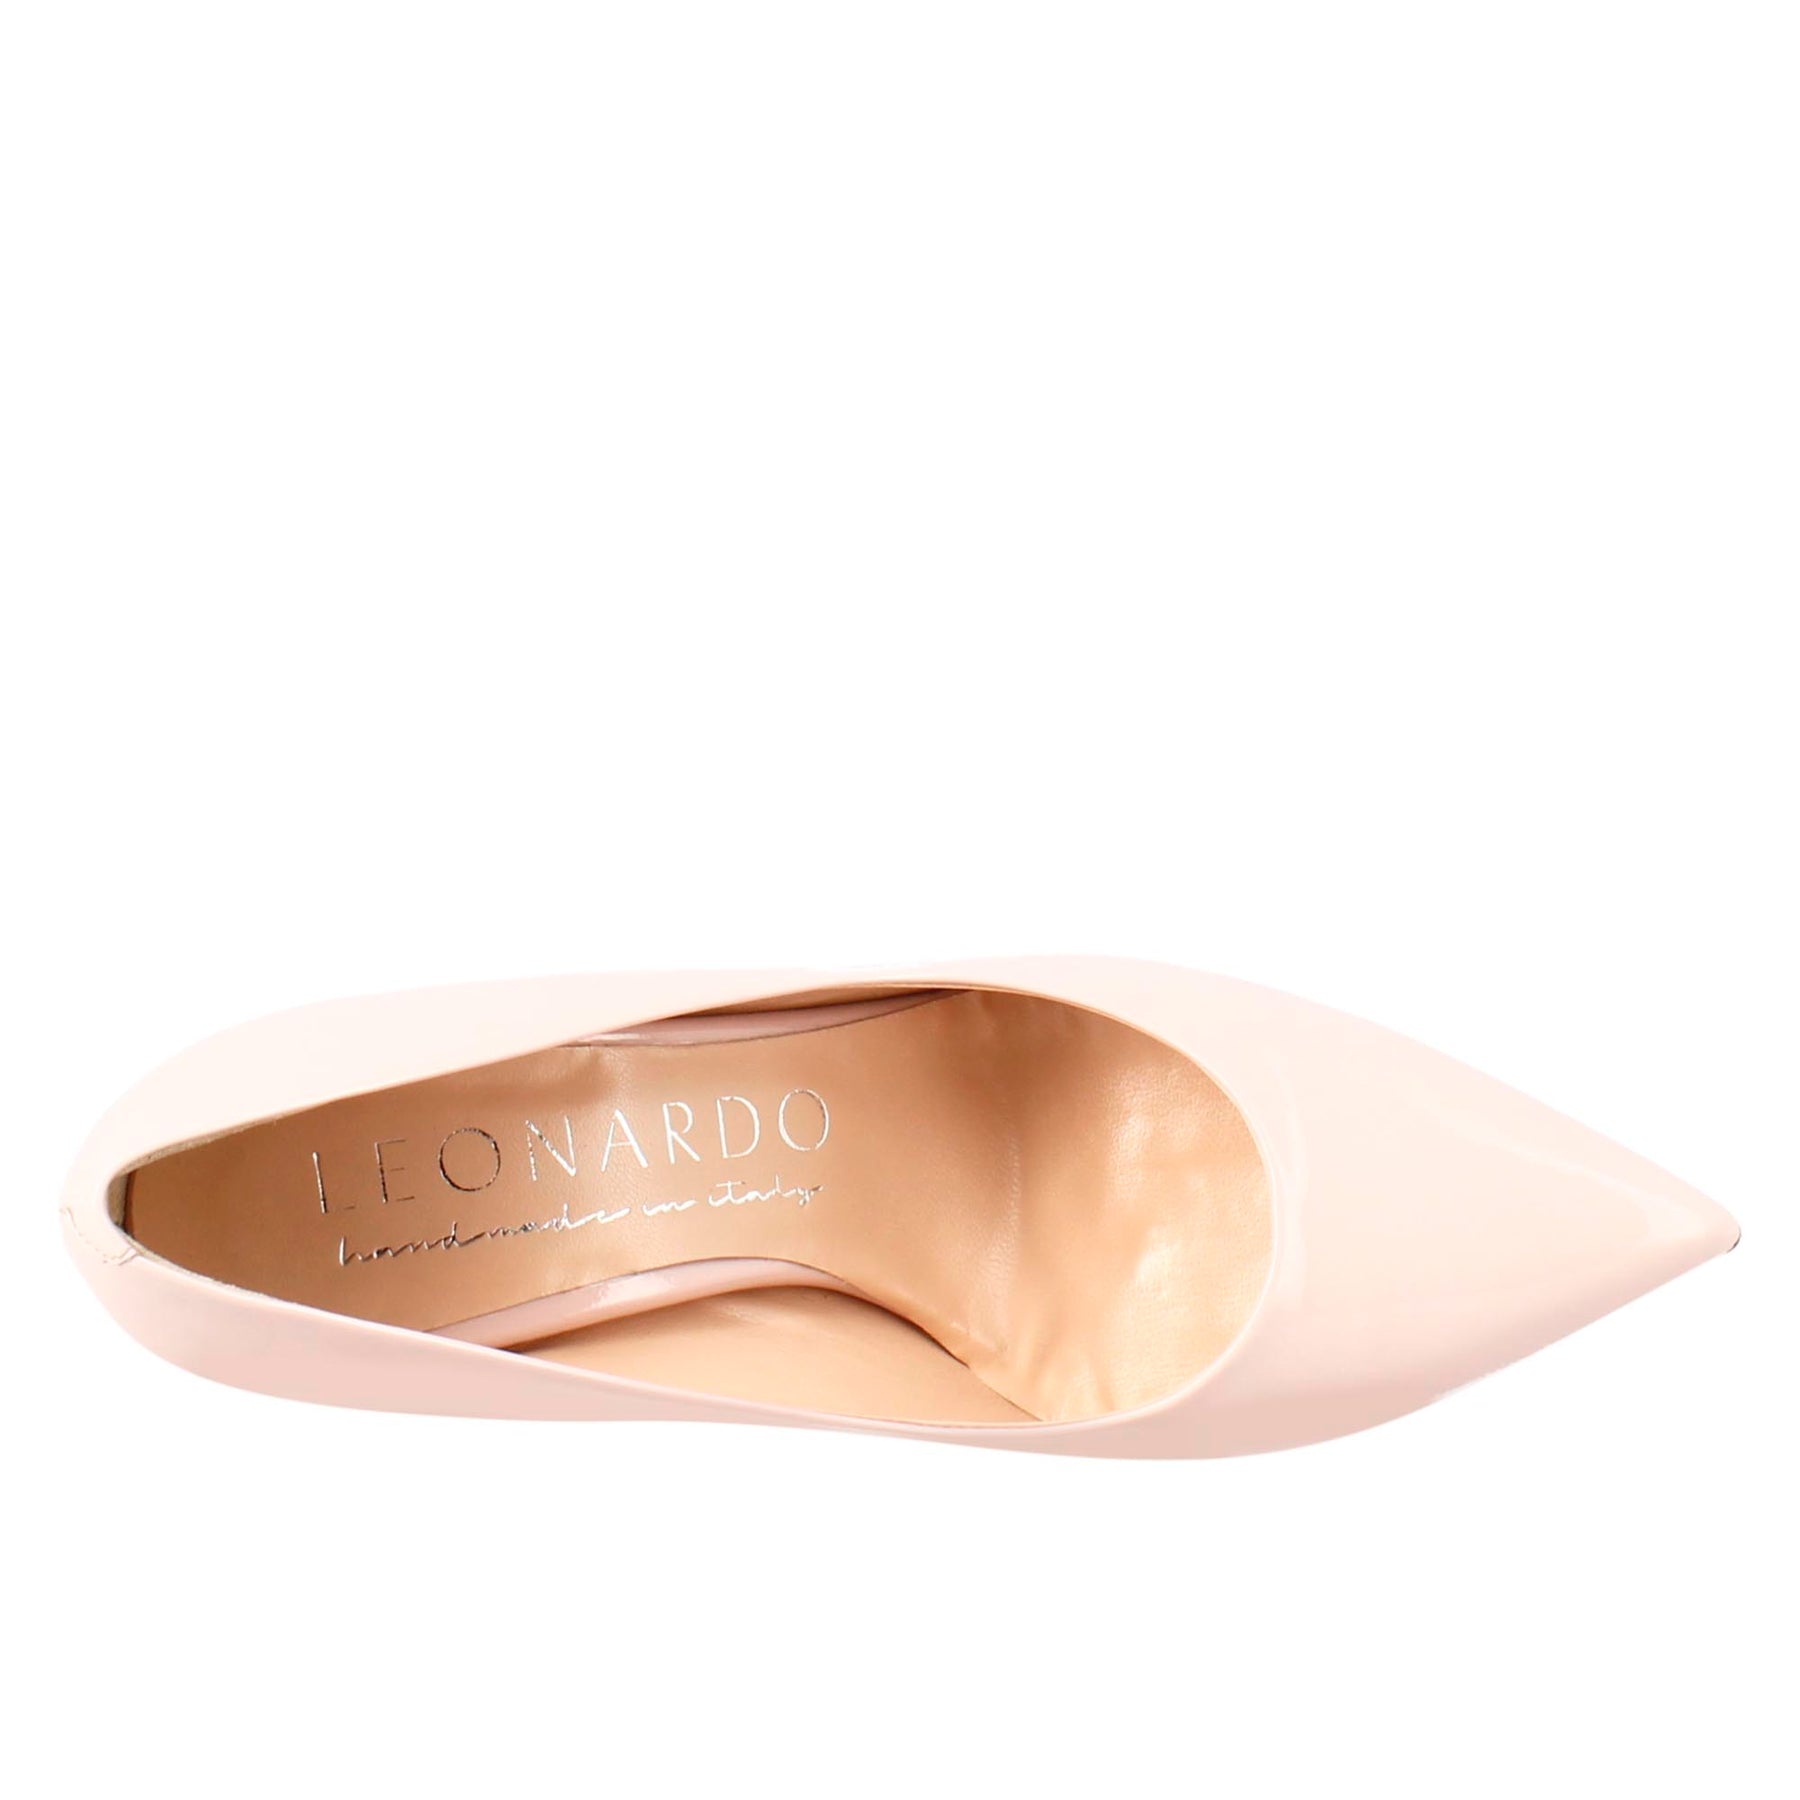 Women's décolleté in pink patent leather with pointed toe